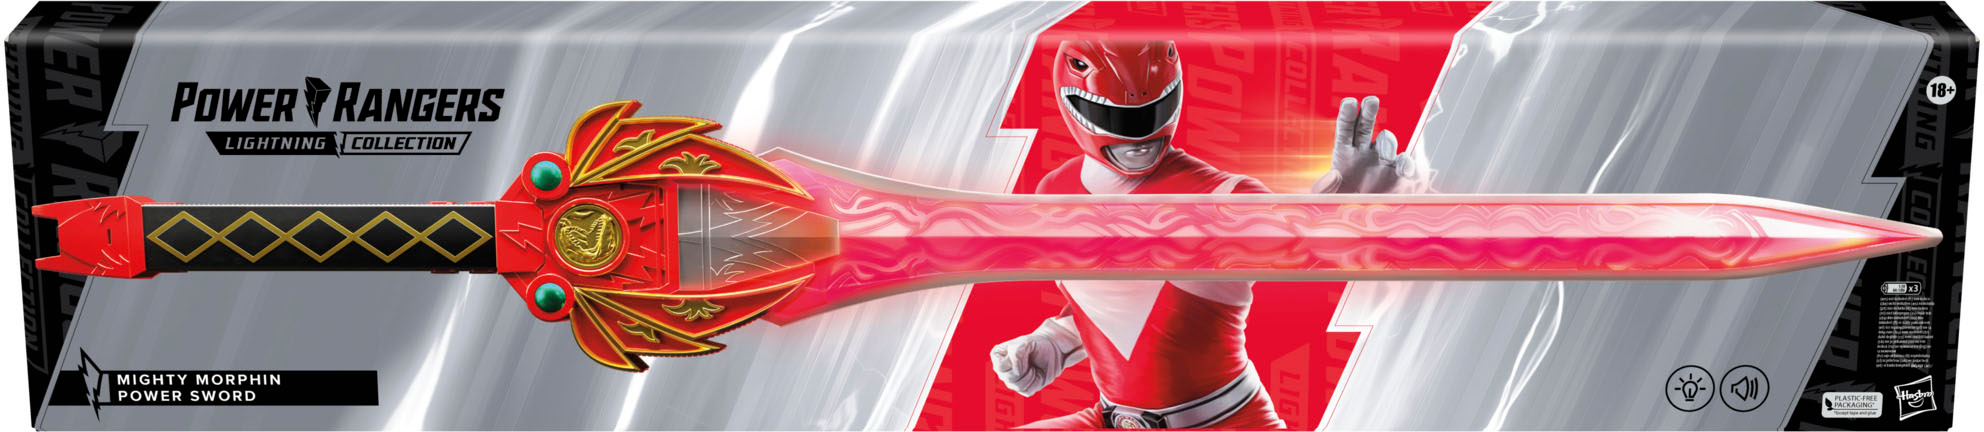 Left View: Power Rangers Lightning Collection Mighty Morphin Red Ranger Power Sword